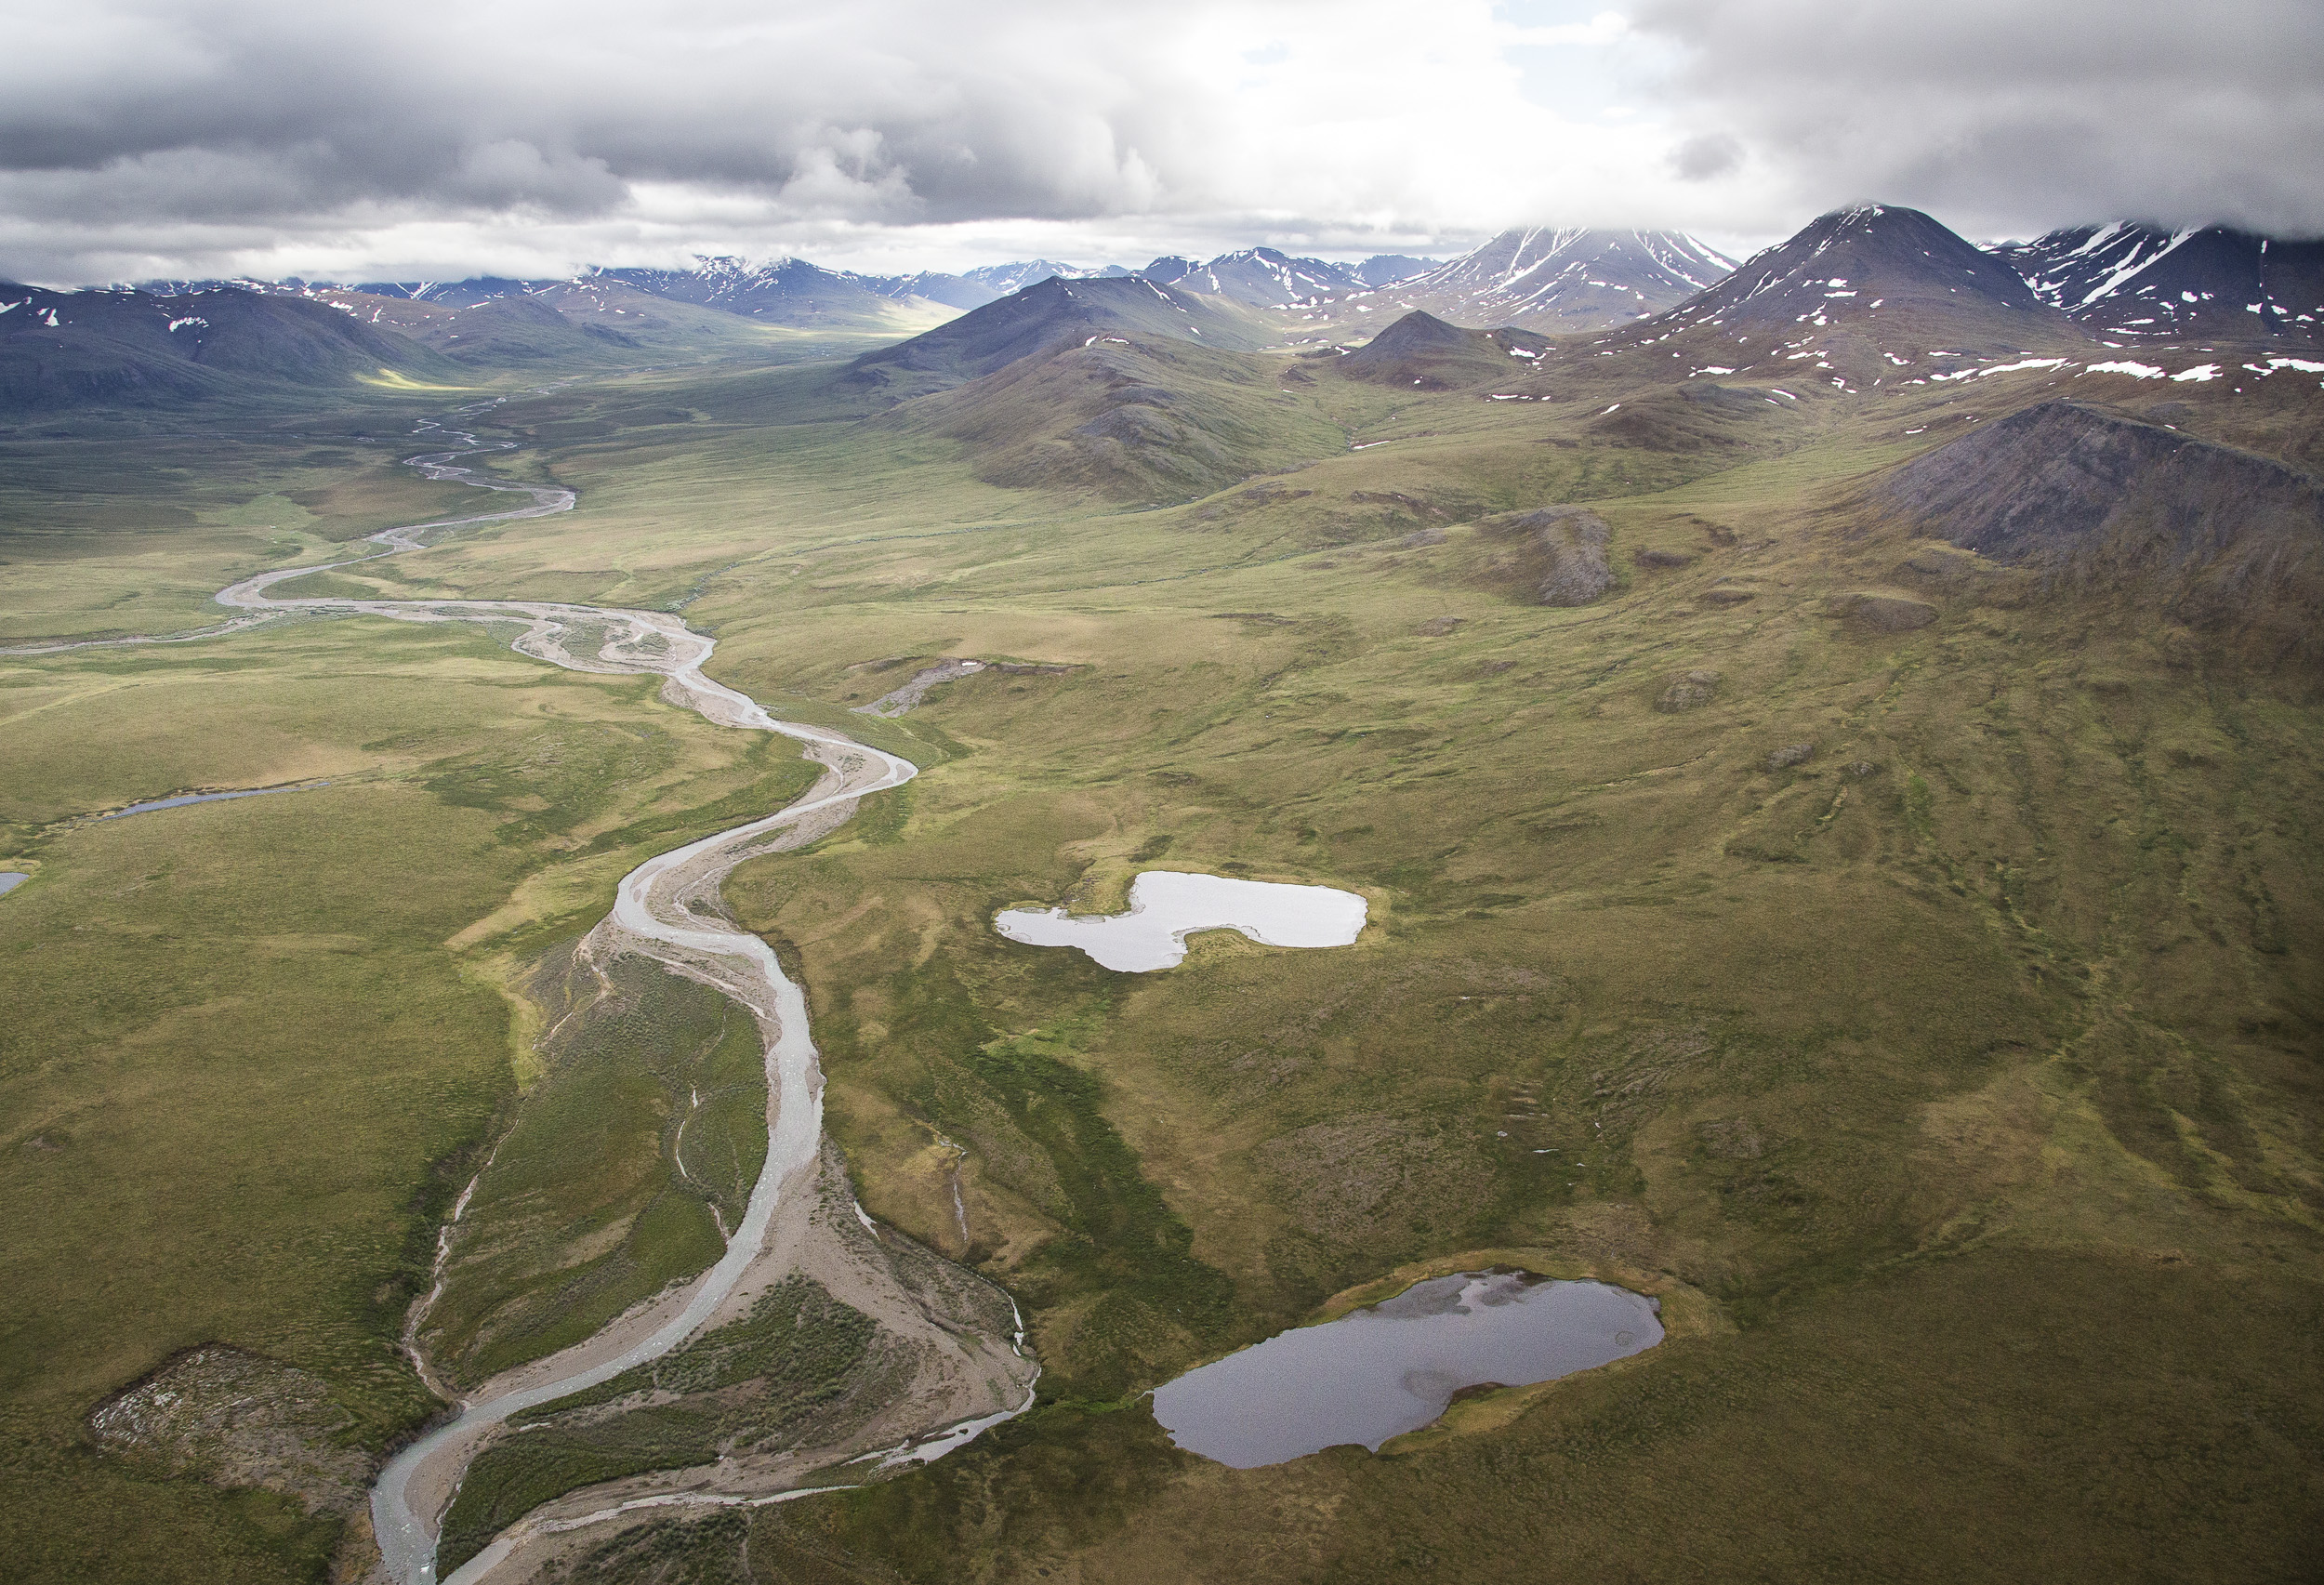 The Central Arctic Management Area - a BLM Wilderness Study Area - sits between NPRA and Gates of the Arctic National Park in Alaska. This little known 320,000 acre area is starkly beautiful and made up of rolling tundra and snow covered peaks.